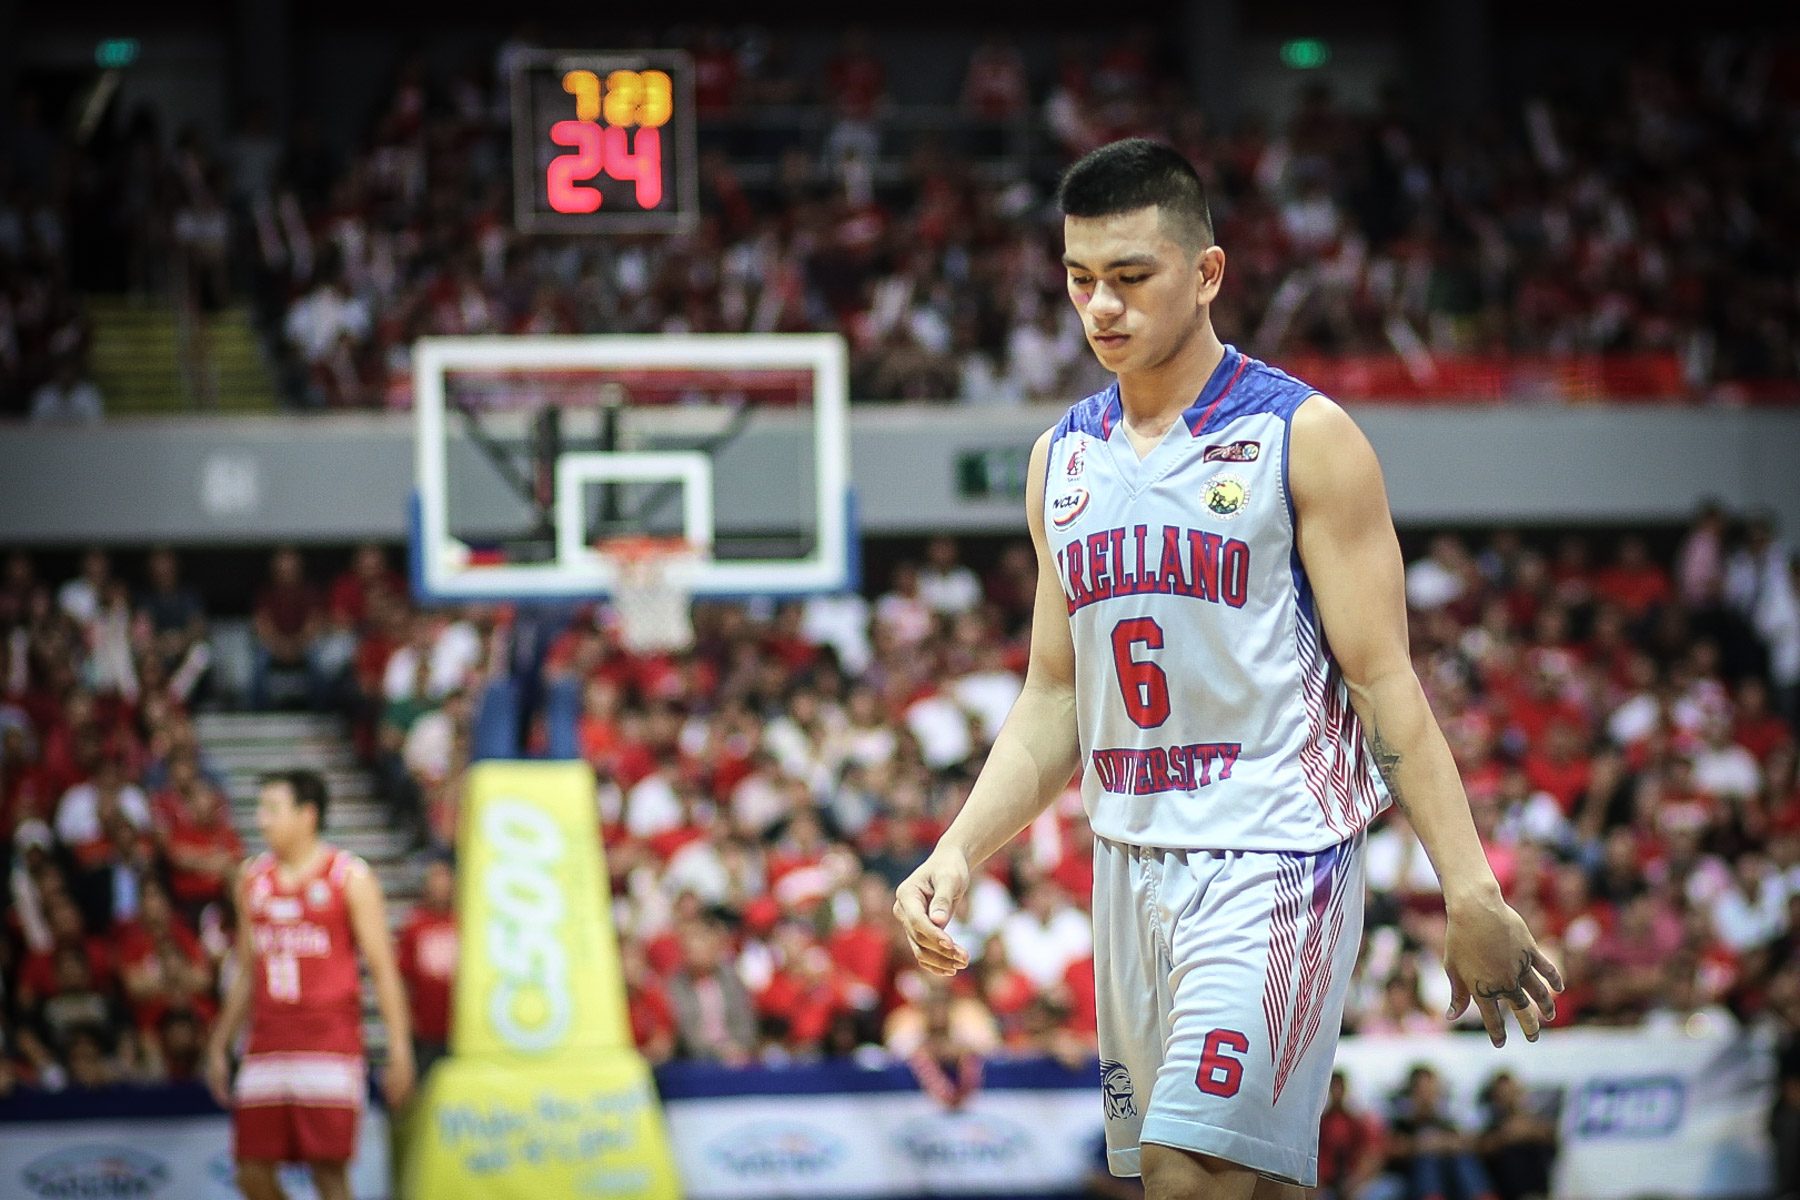 Jio Jalalon after NCAA Finals defeat: Arellano’s time will come